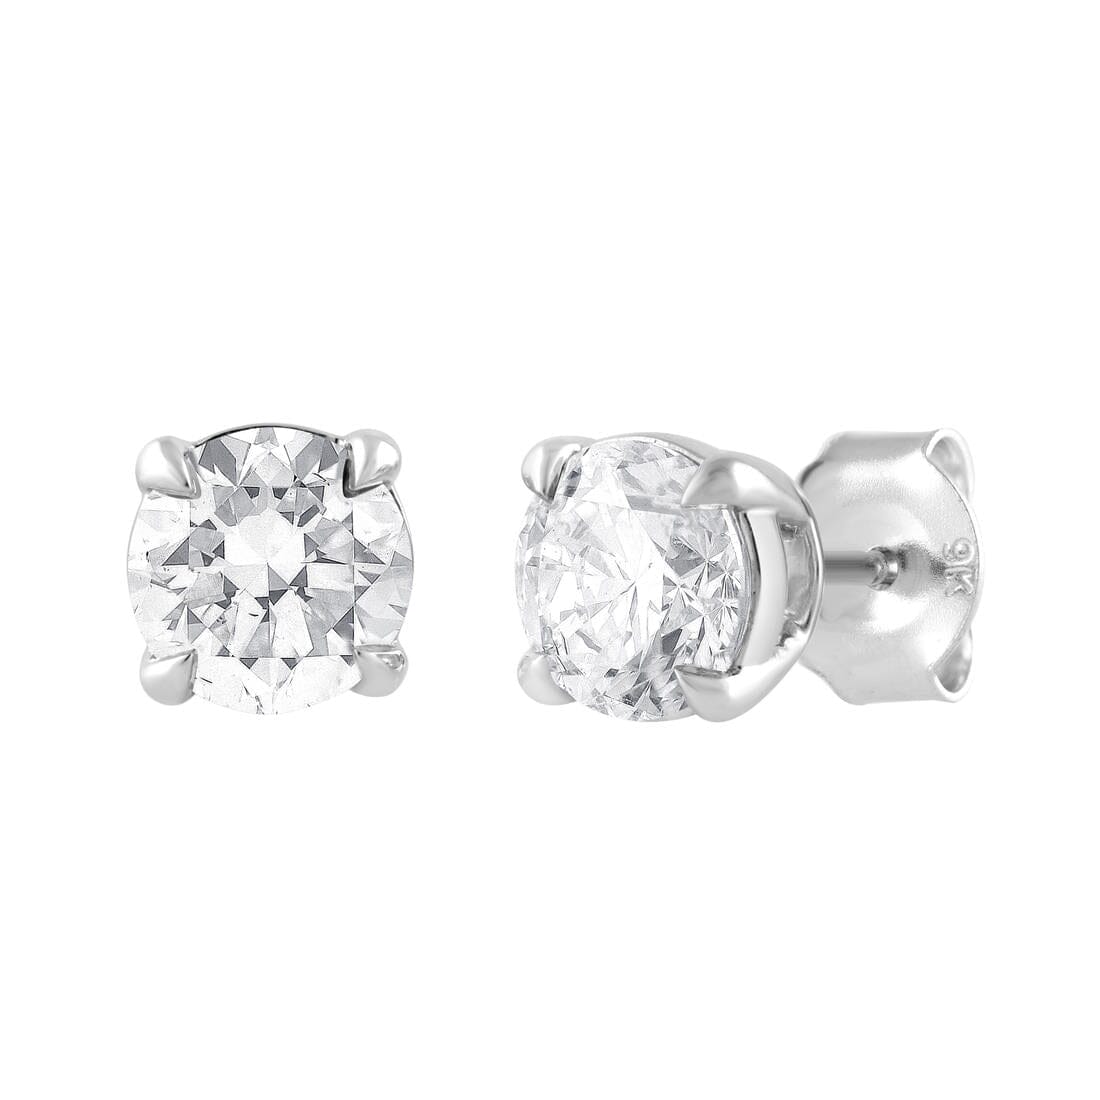 Meera Solitaire Earrings with 1.50ct of Laboratory Grown Diamonds in 9ct White Gold Earrings Bevilles 